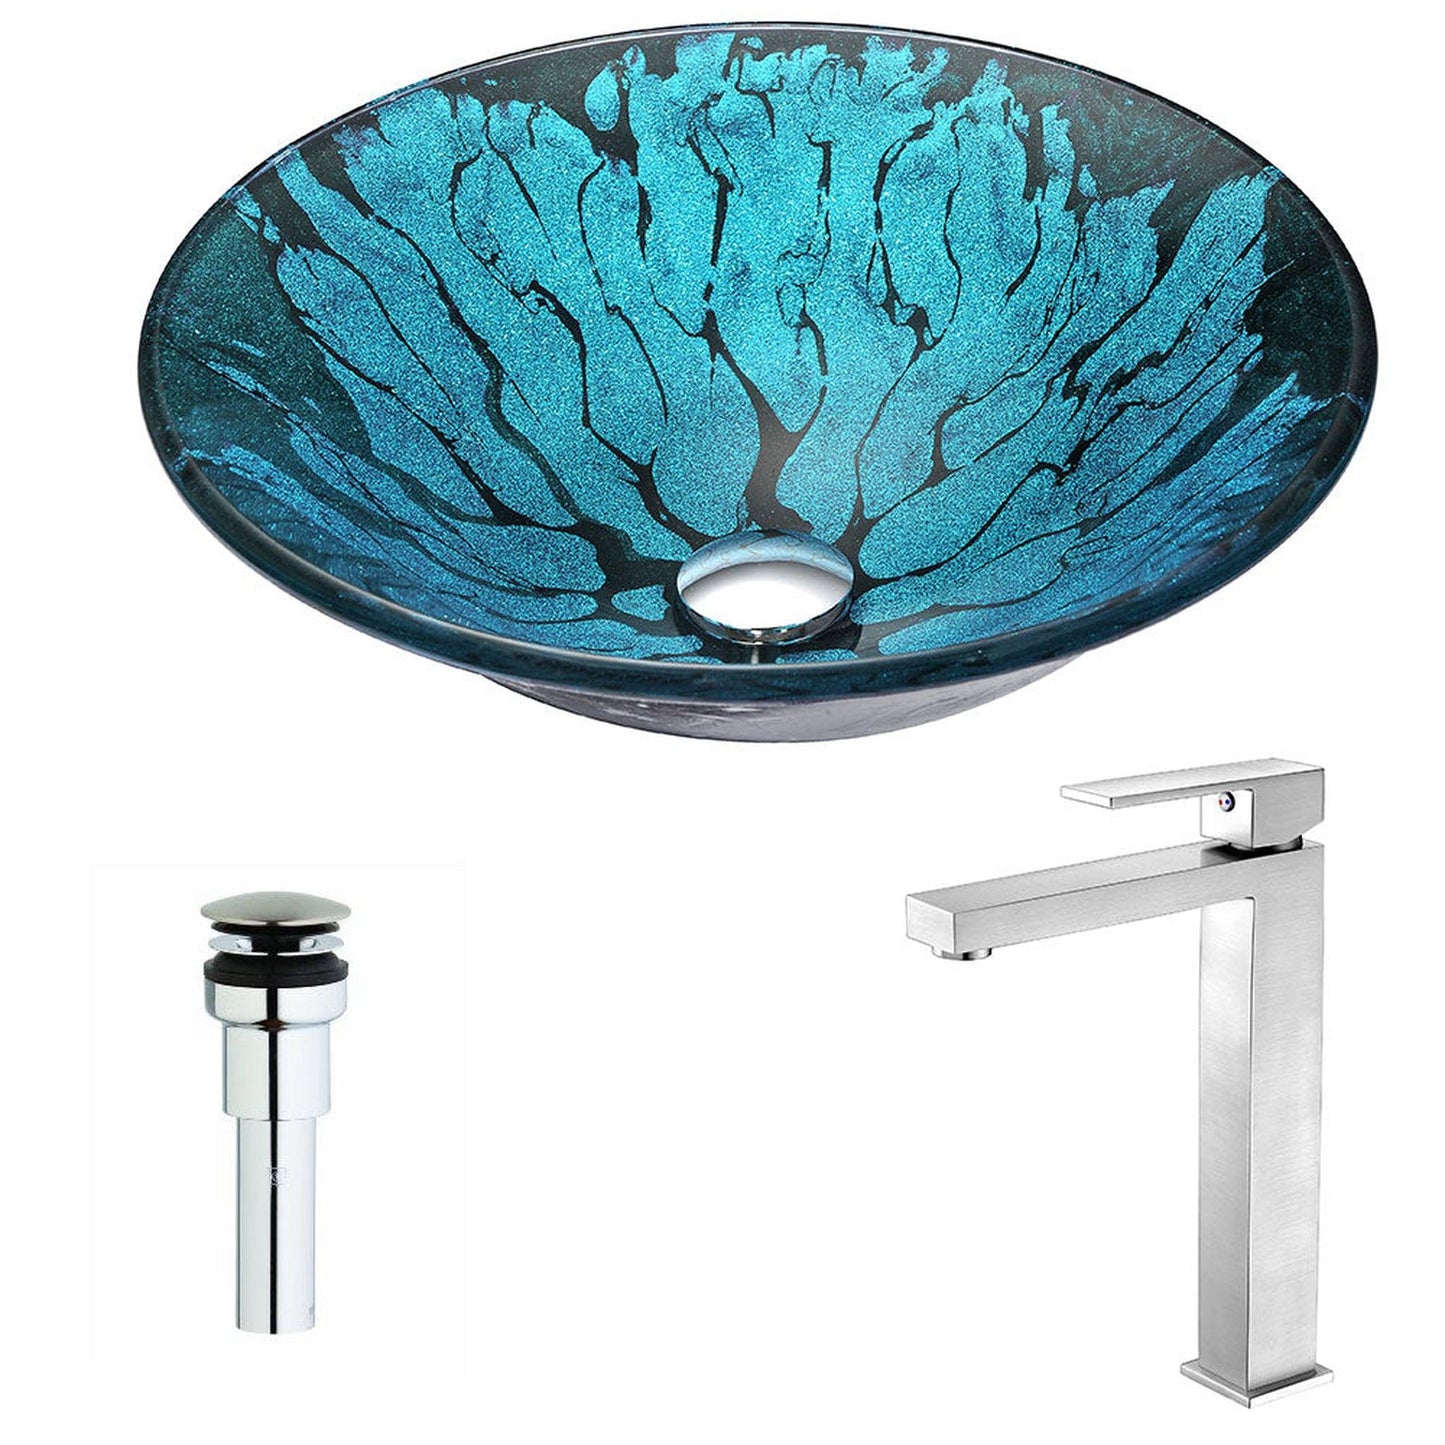 ANZZI Key Series 17" x 17" Round Lustrous Blue and Black Deco-Glass Vessel Sink With Chrome Pop-Up Drain and Brushed Nickel Enti Faucet